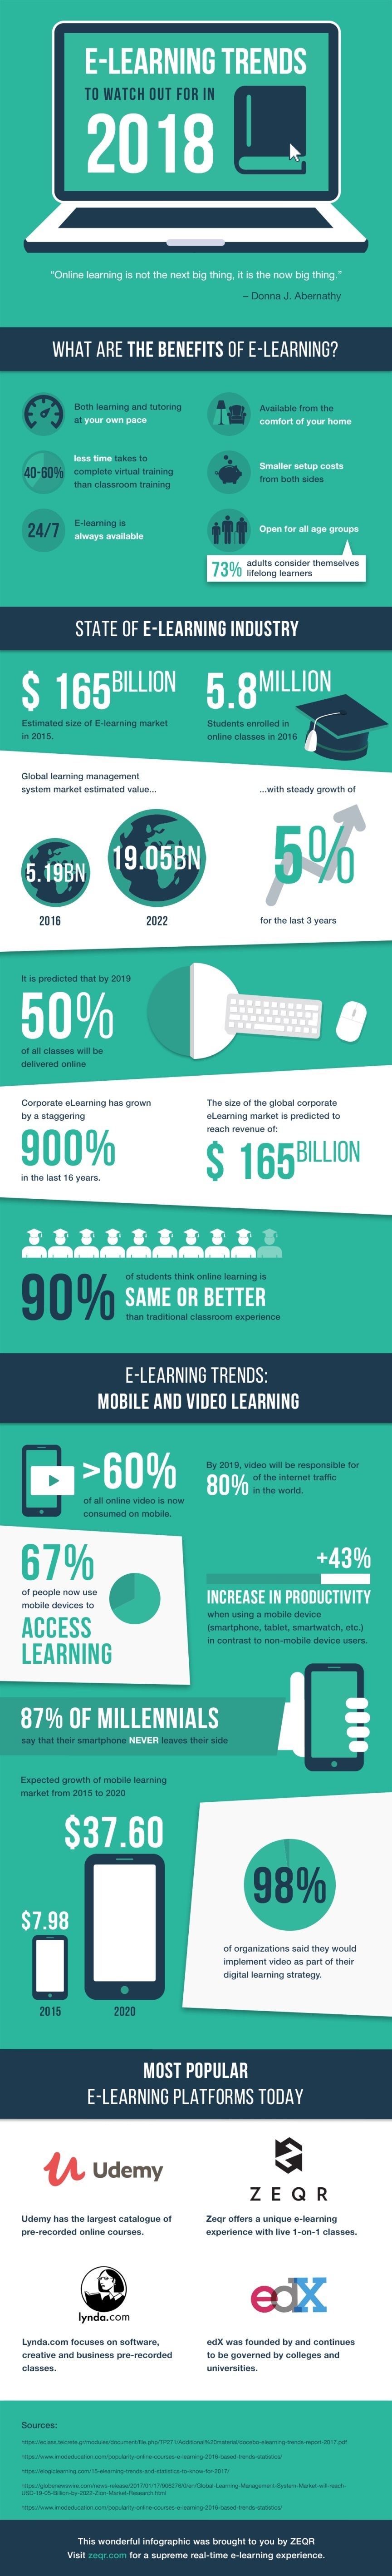 eLearning Trends To Watch Out For In 2018 Infographic